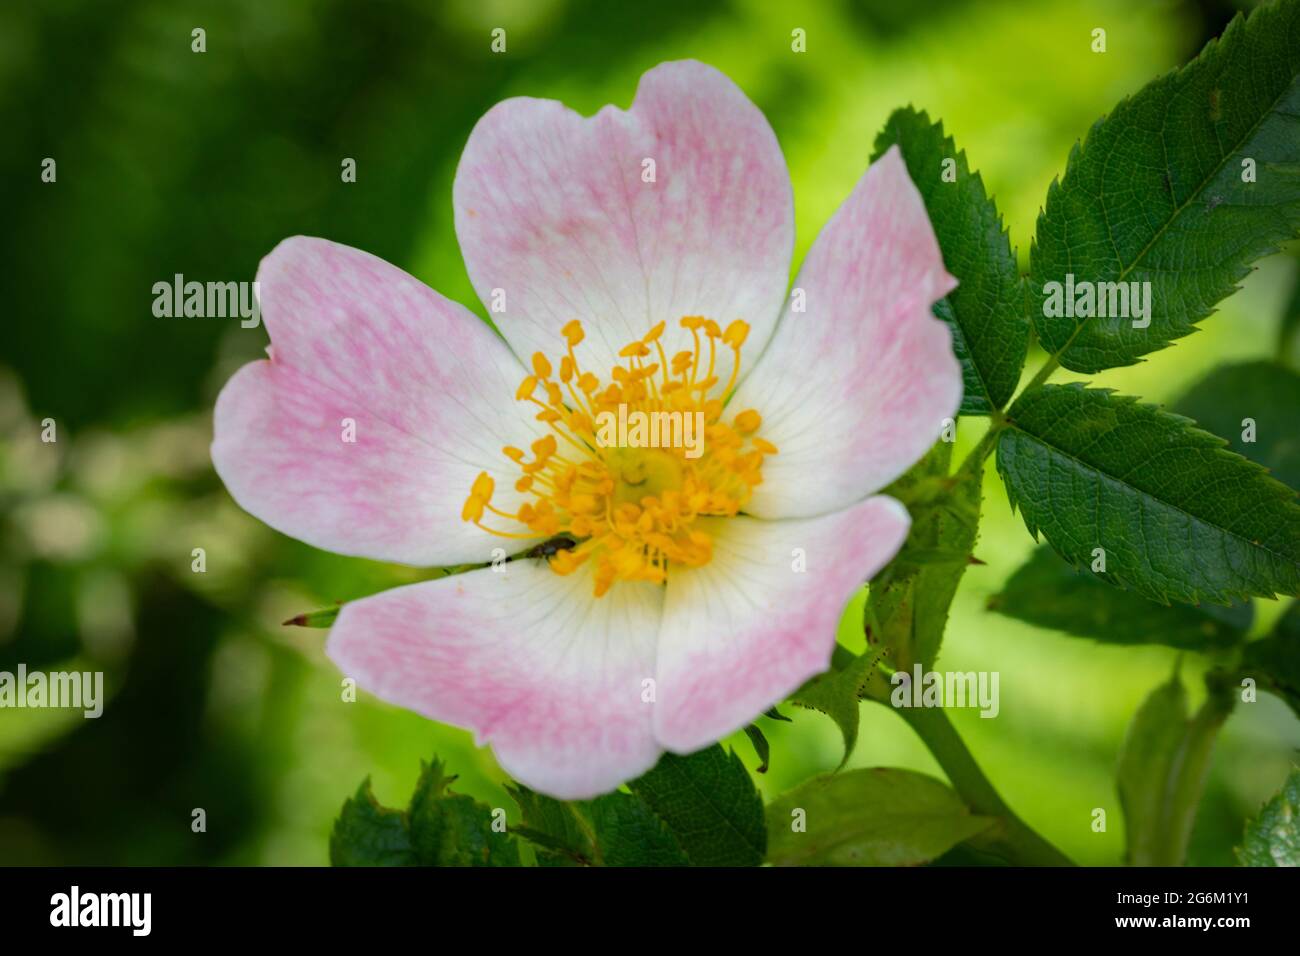 Rosa Canina Dog Rose 10 Seeds Outstanding variety 